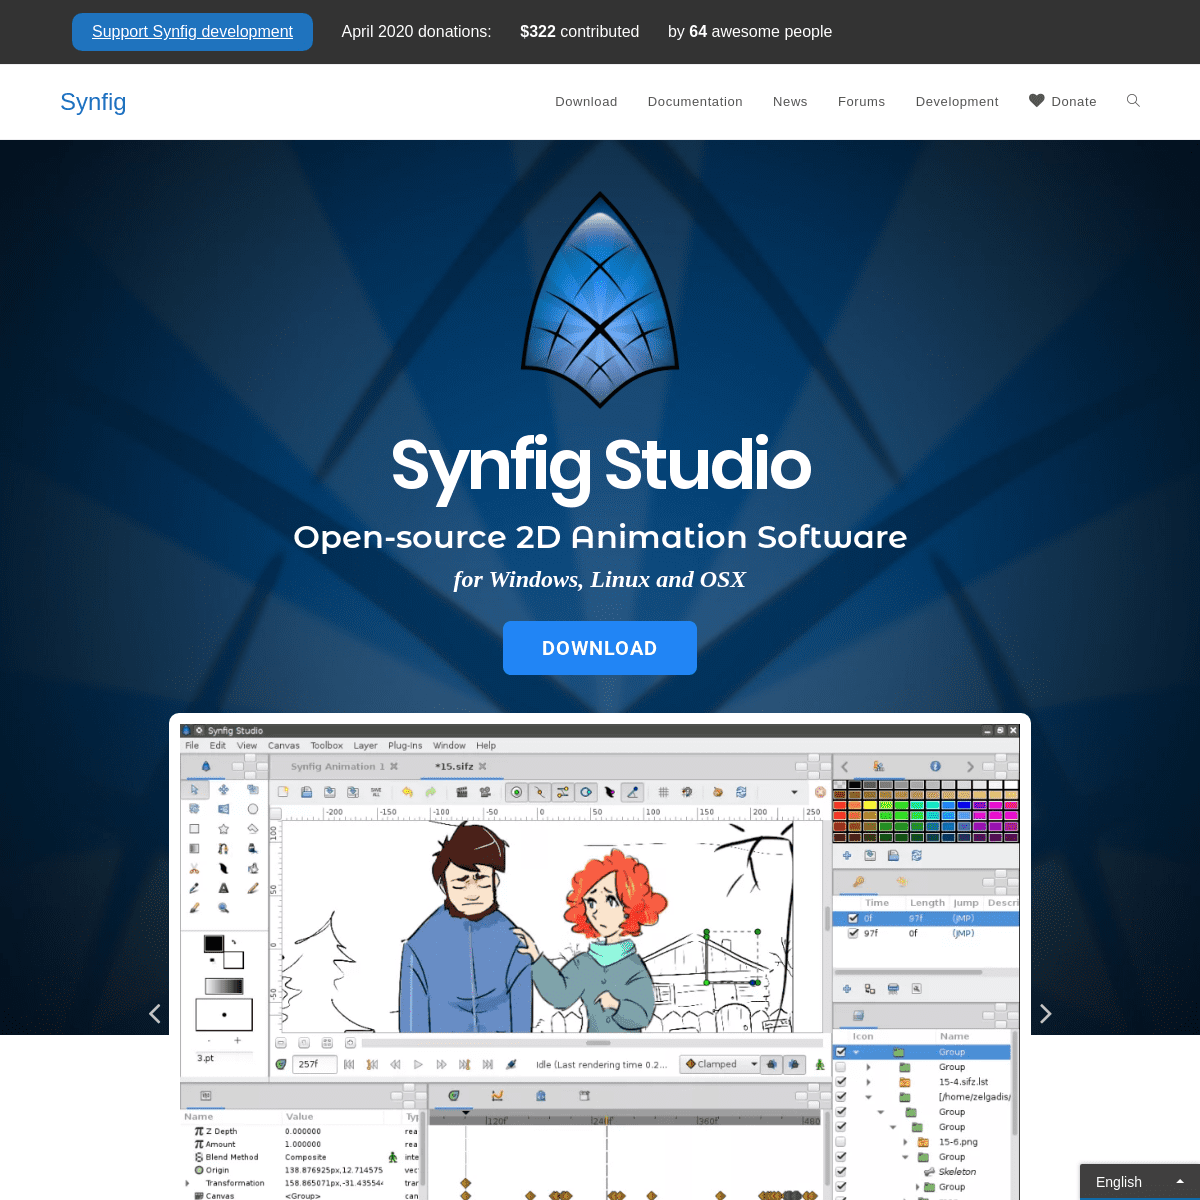 A complete backup of synfig.org